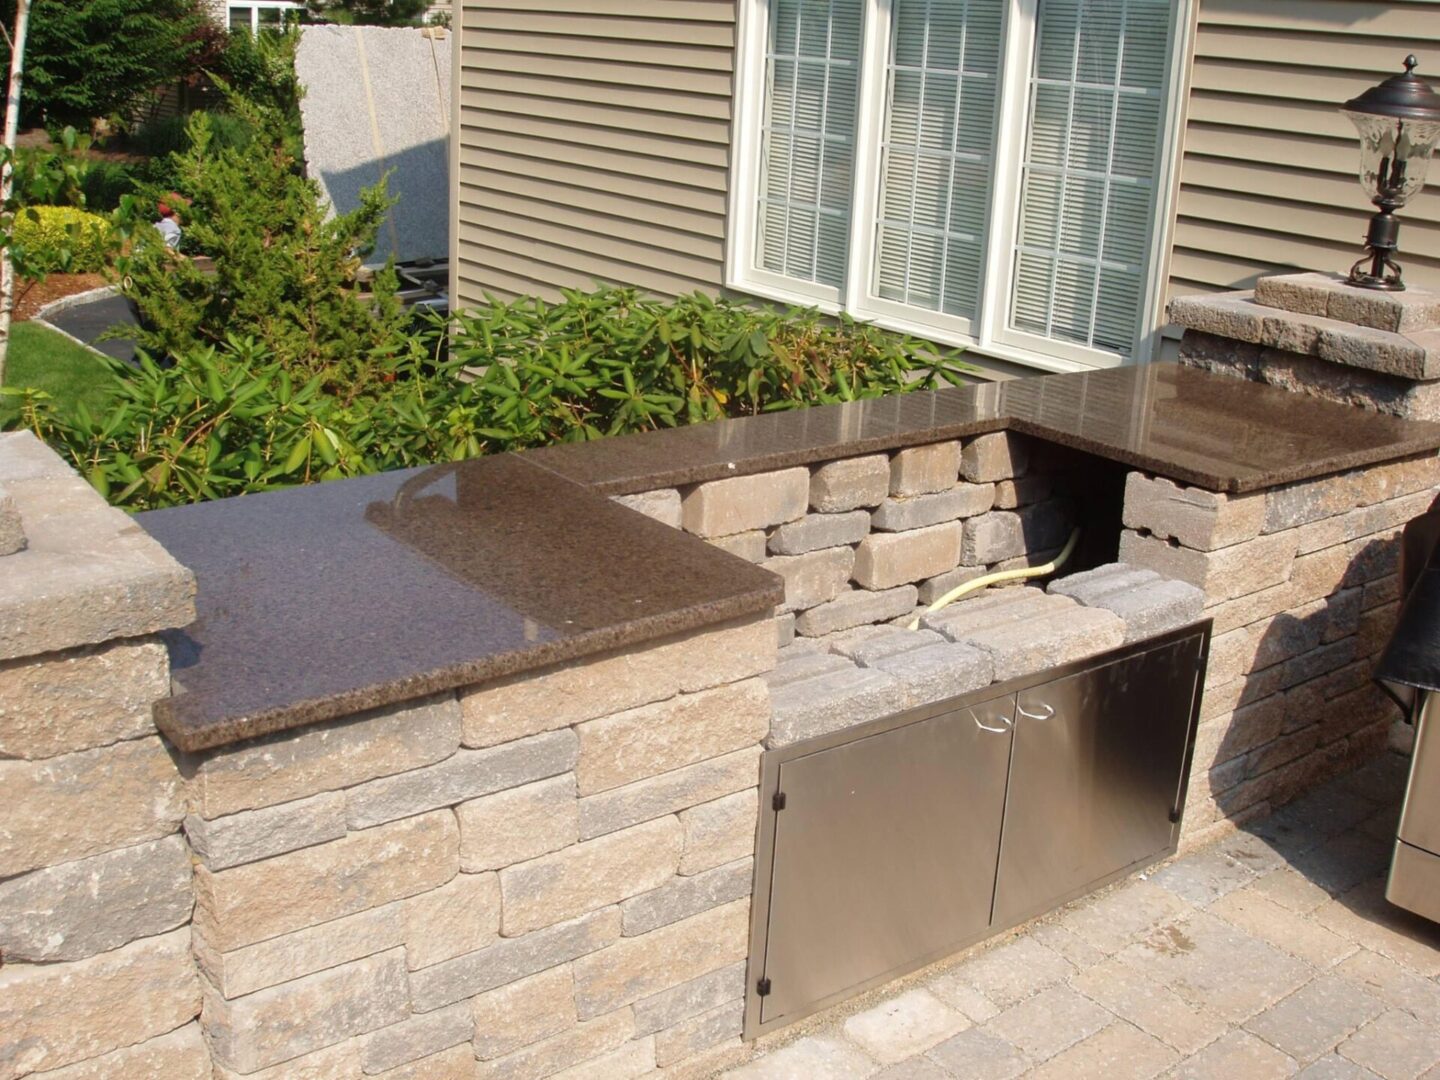 A brick patio with an outdoor grill and counter.